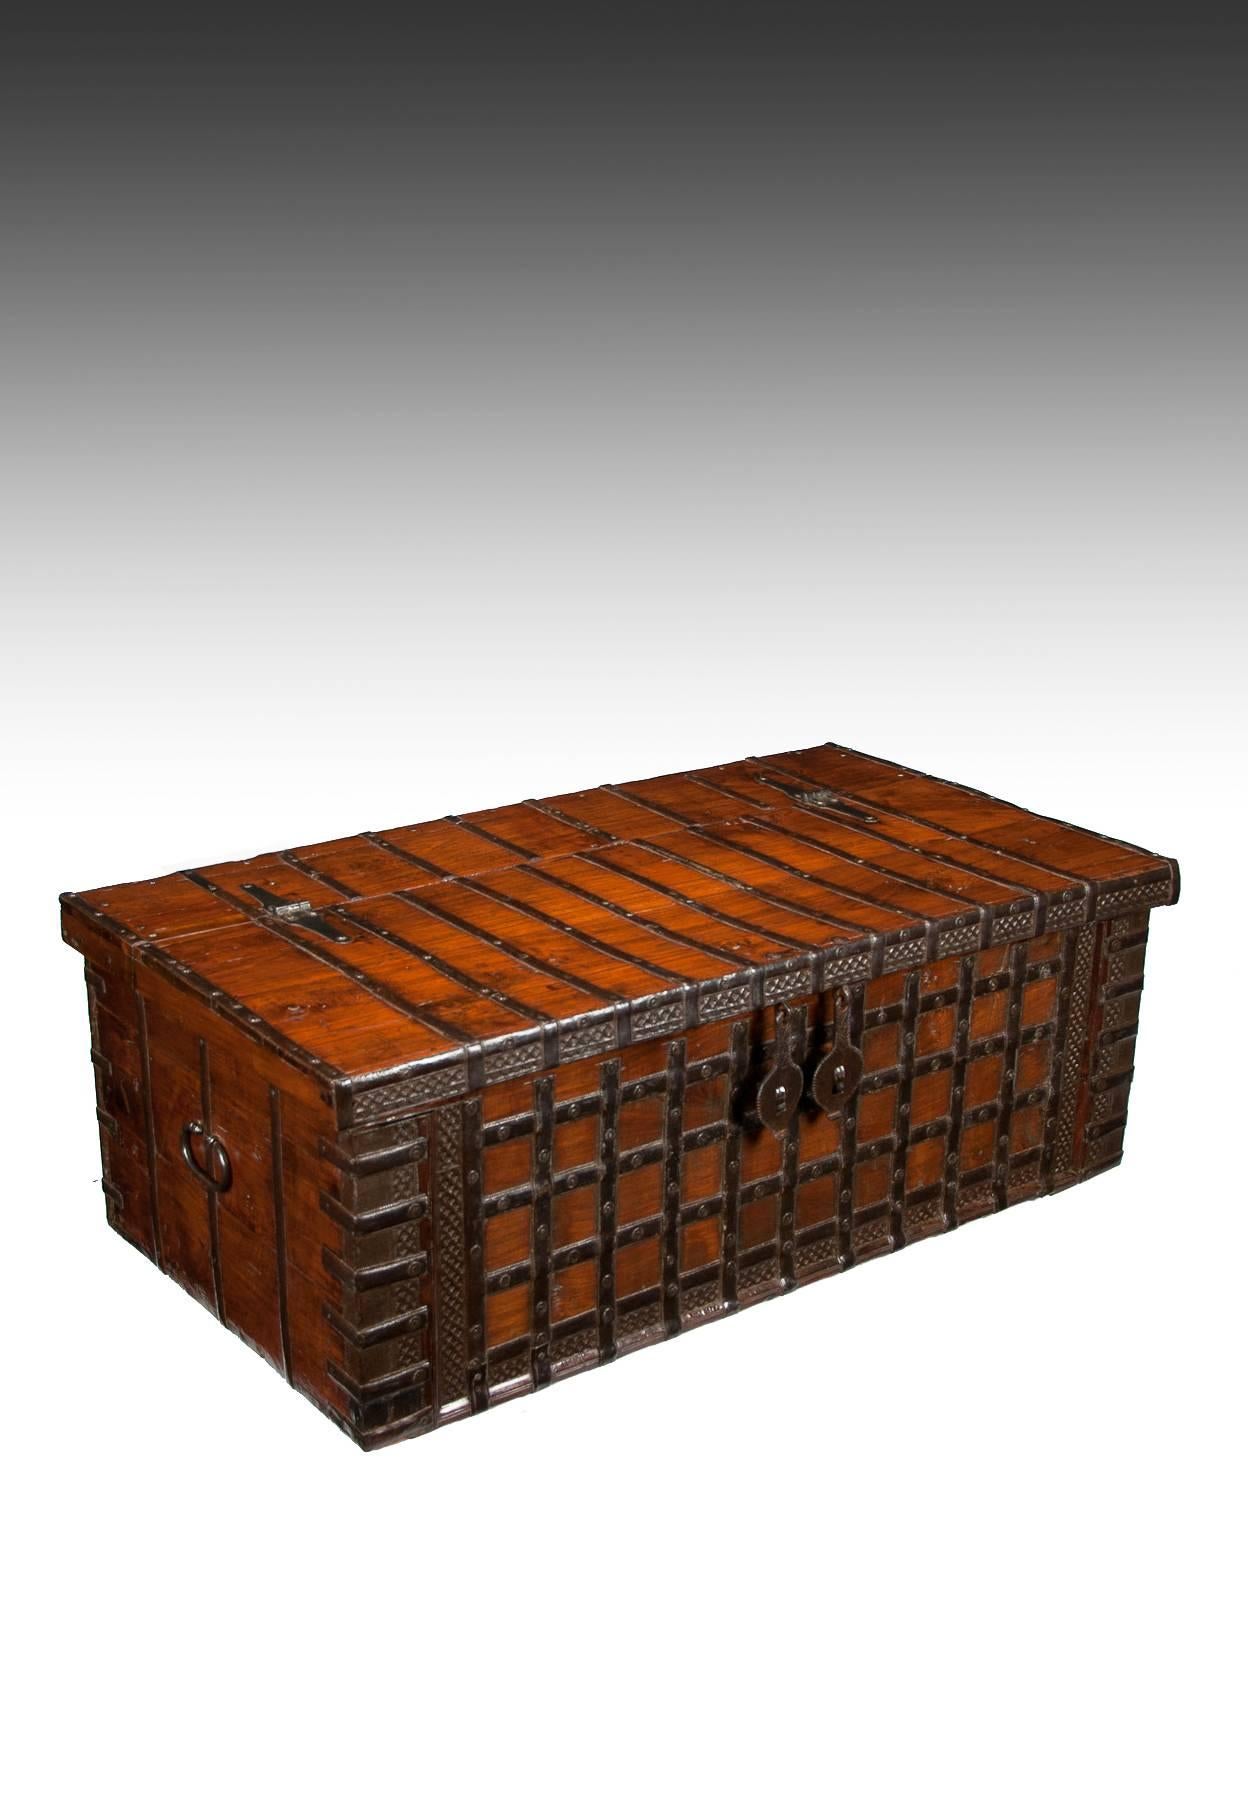 Good quality solid elm 19th century Anglo-Indian iron strapped chest / trunk dating to circa 1820.
Constructed from solid elm with iron banding and strapwork wrapping around the entire piece in a very decorative manner. Having a double catch lock